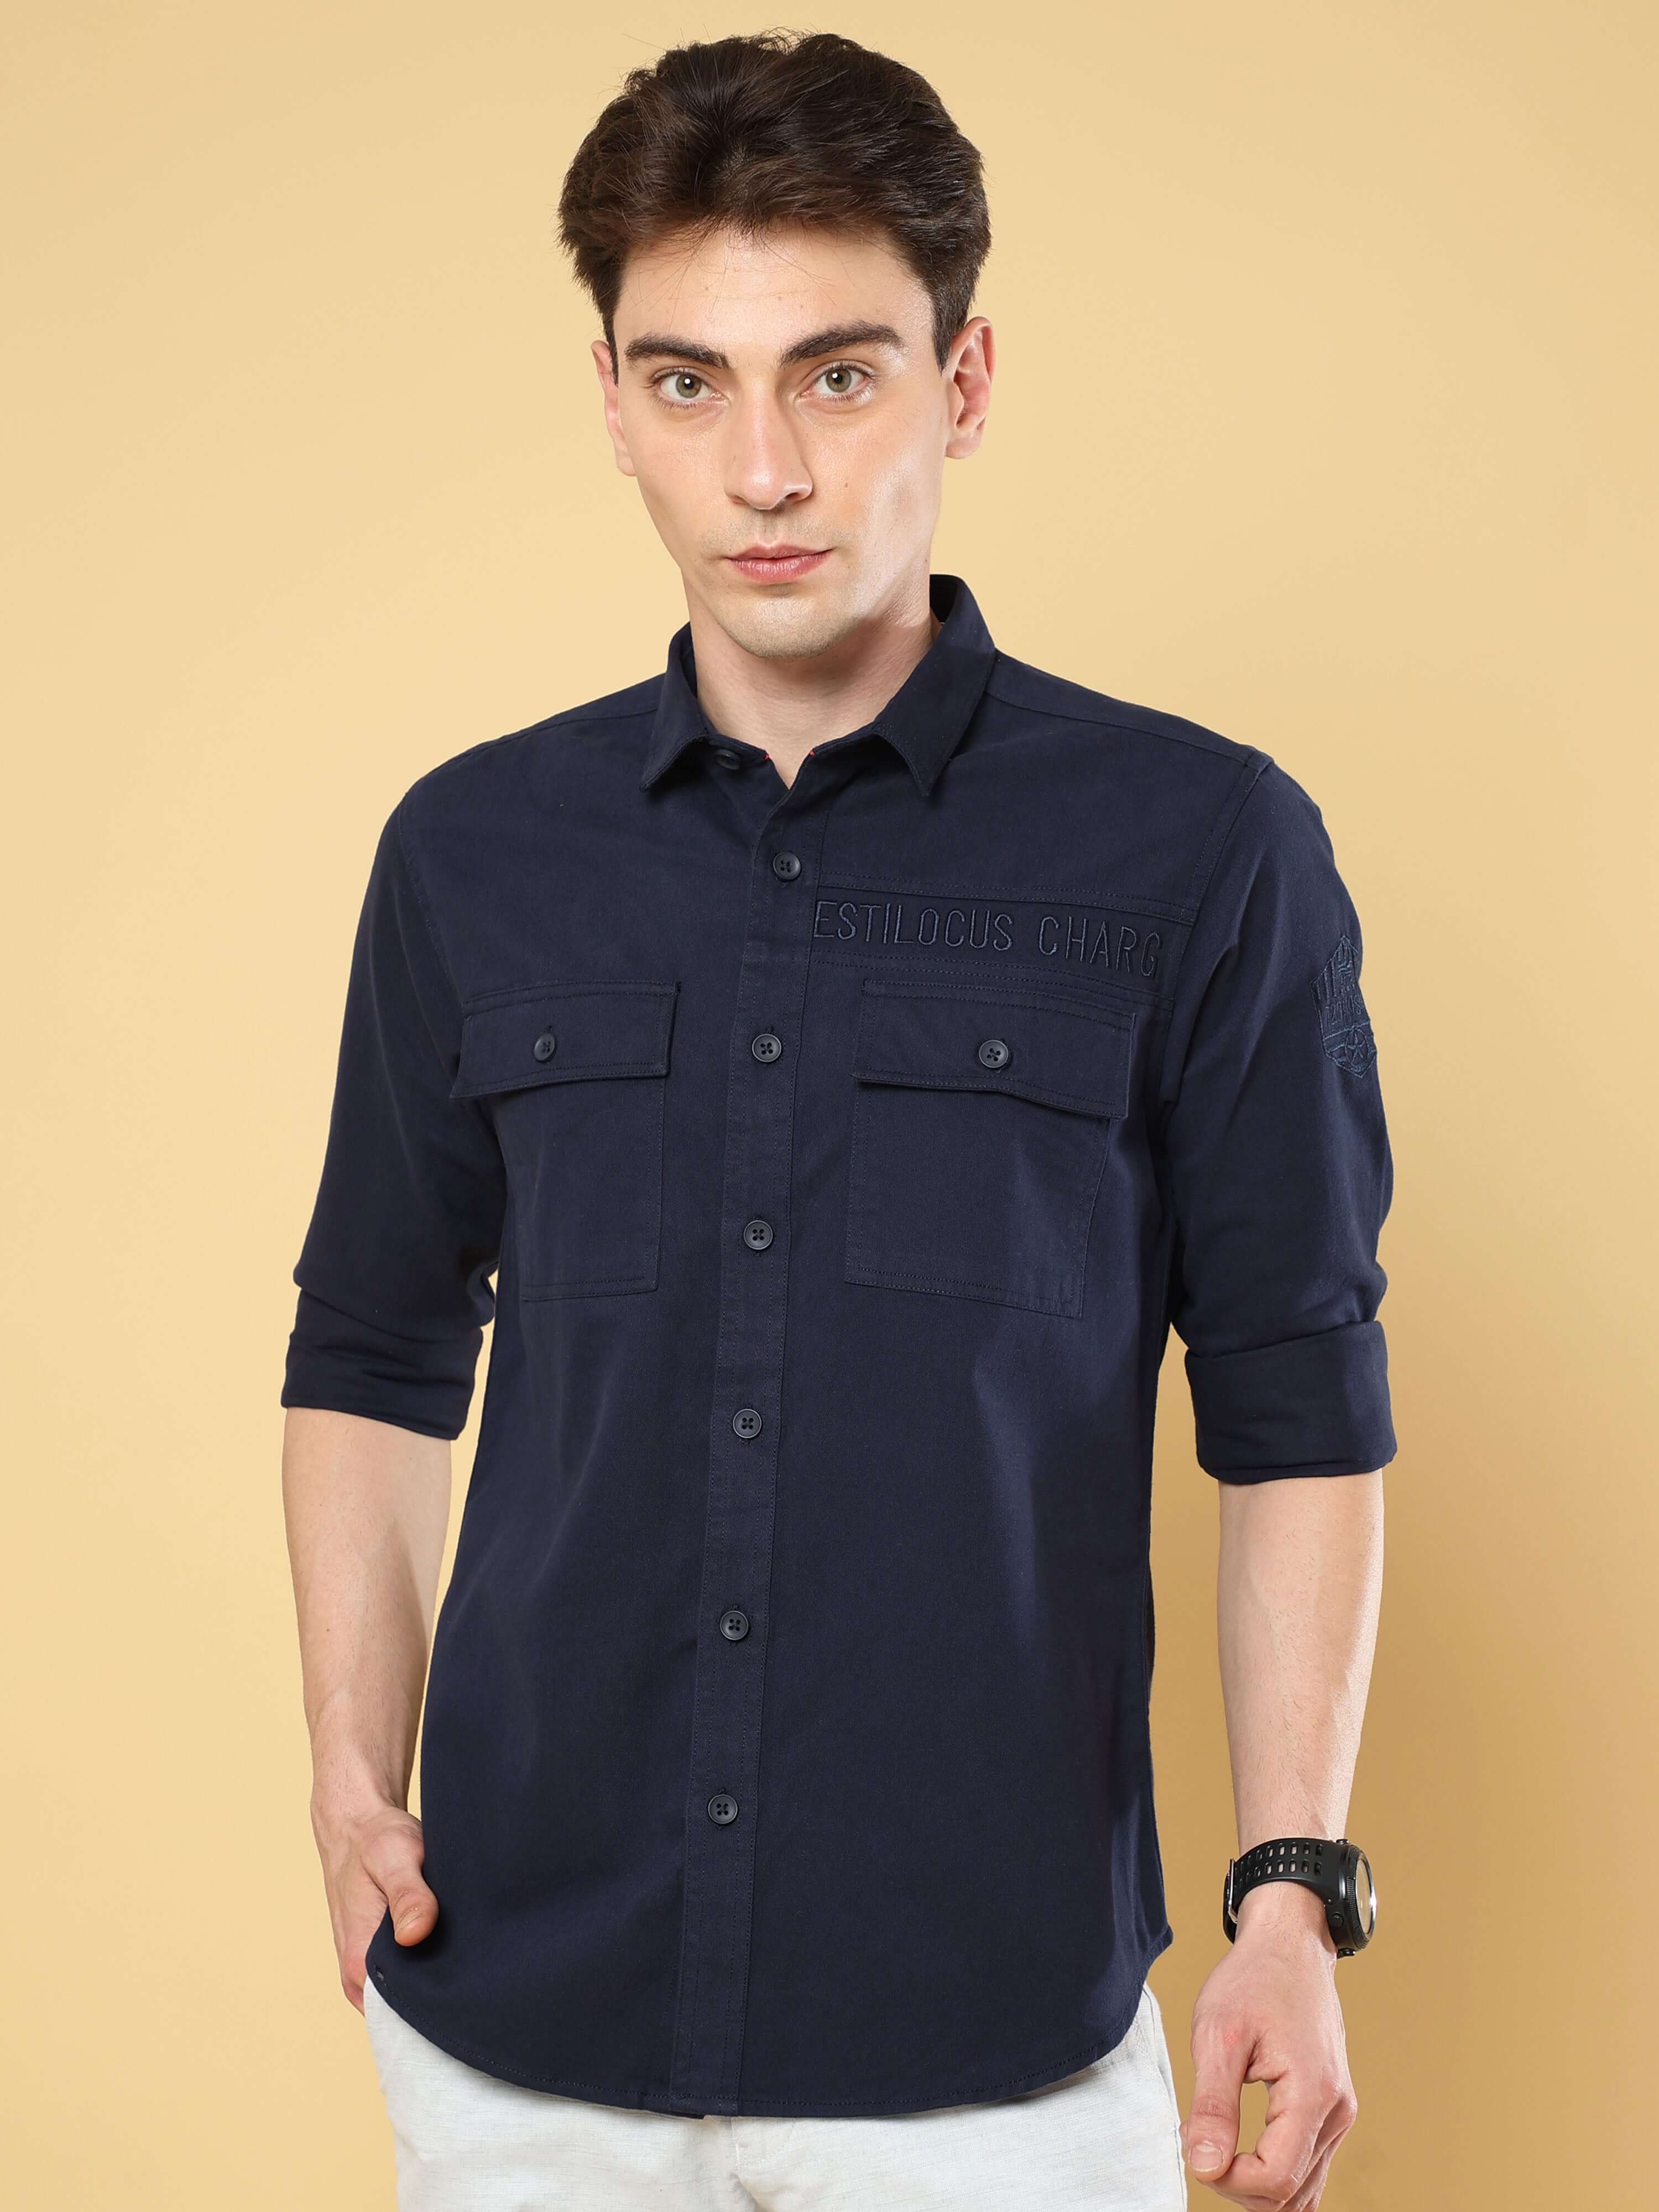 Navy Twill Solid Cargo Shirt shop online at Estilocus. • 100% premium cotton• Full-sleeve solid shirt• Cut and sew placket• Regular collar• Double button round cuff's.• Double pocket with flap.• Finest embroidery on sleeve and front panel• Curved hemline•